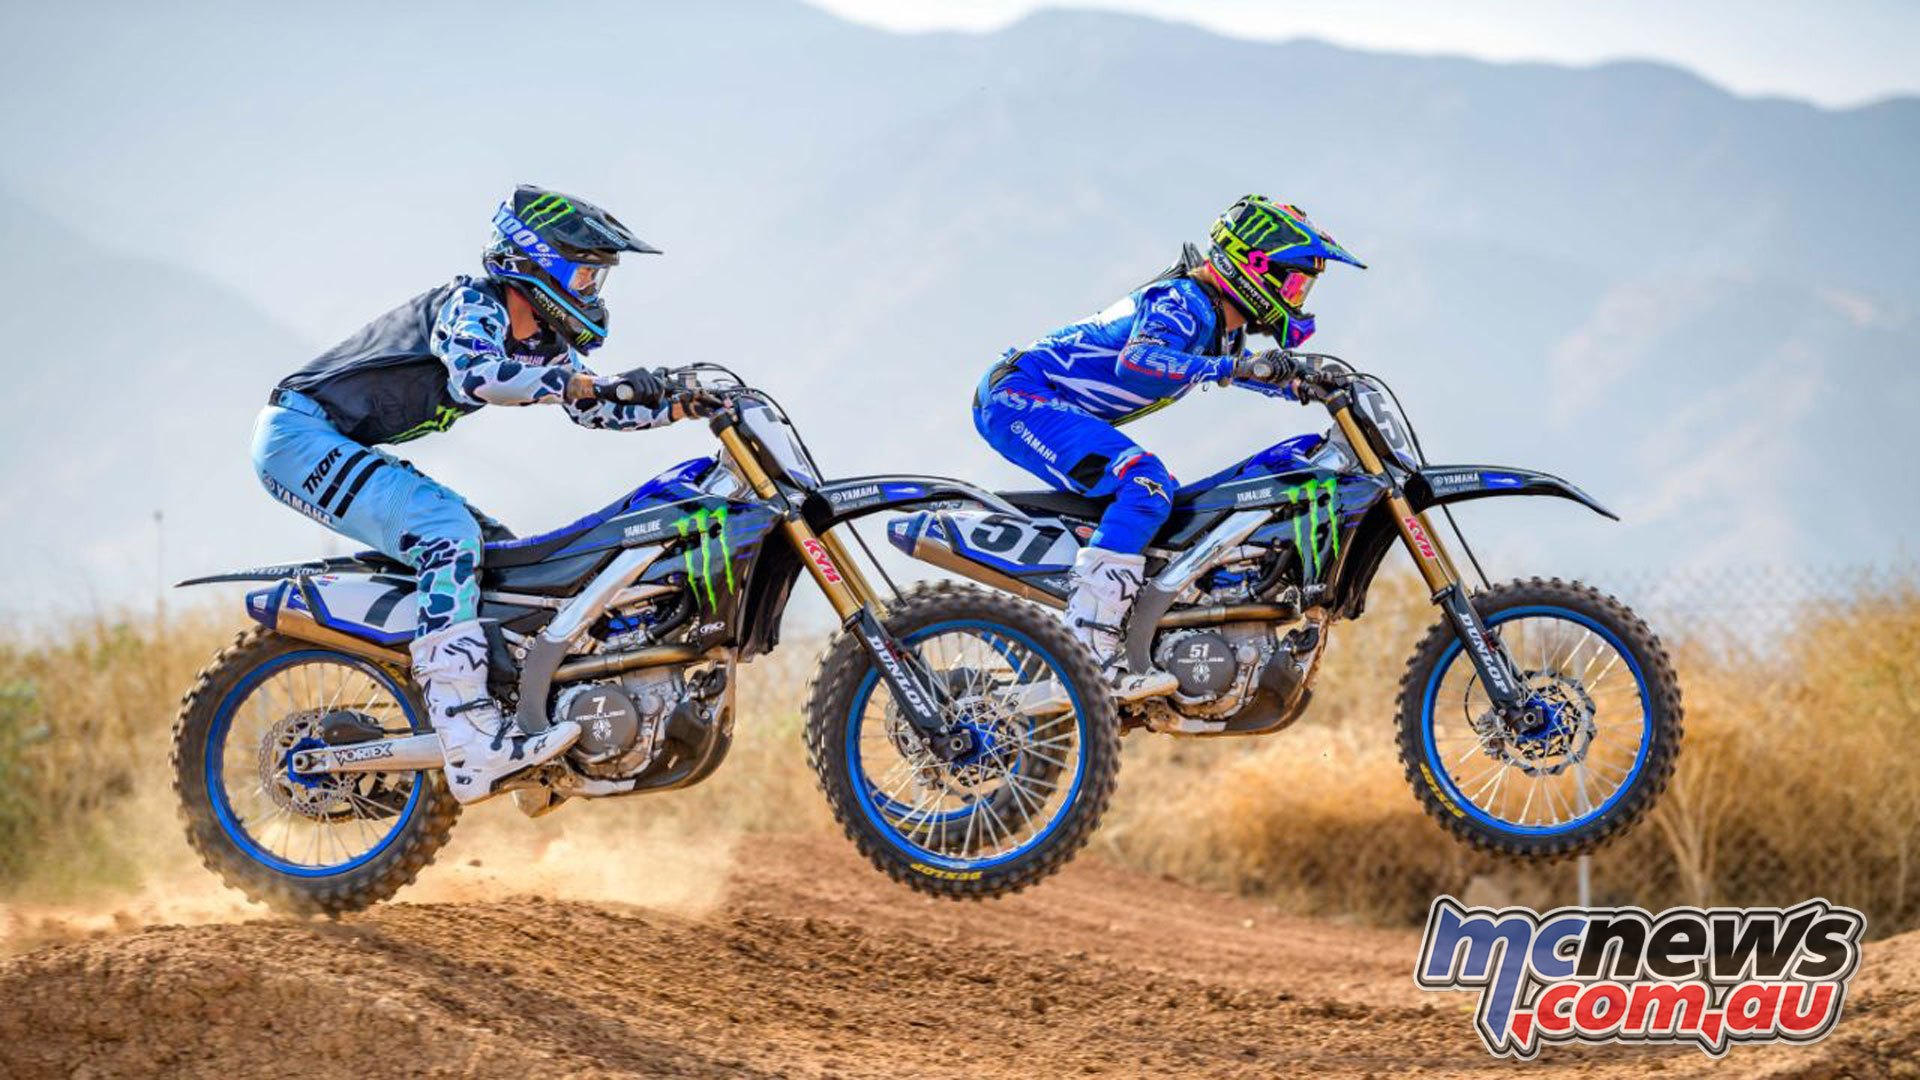 Barcia Plessinger with Yamaha Factory Racing in